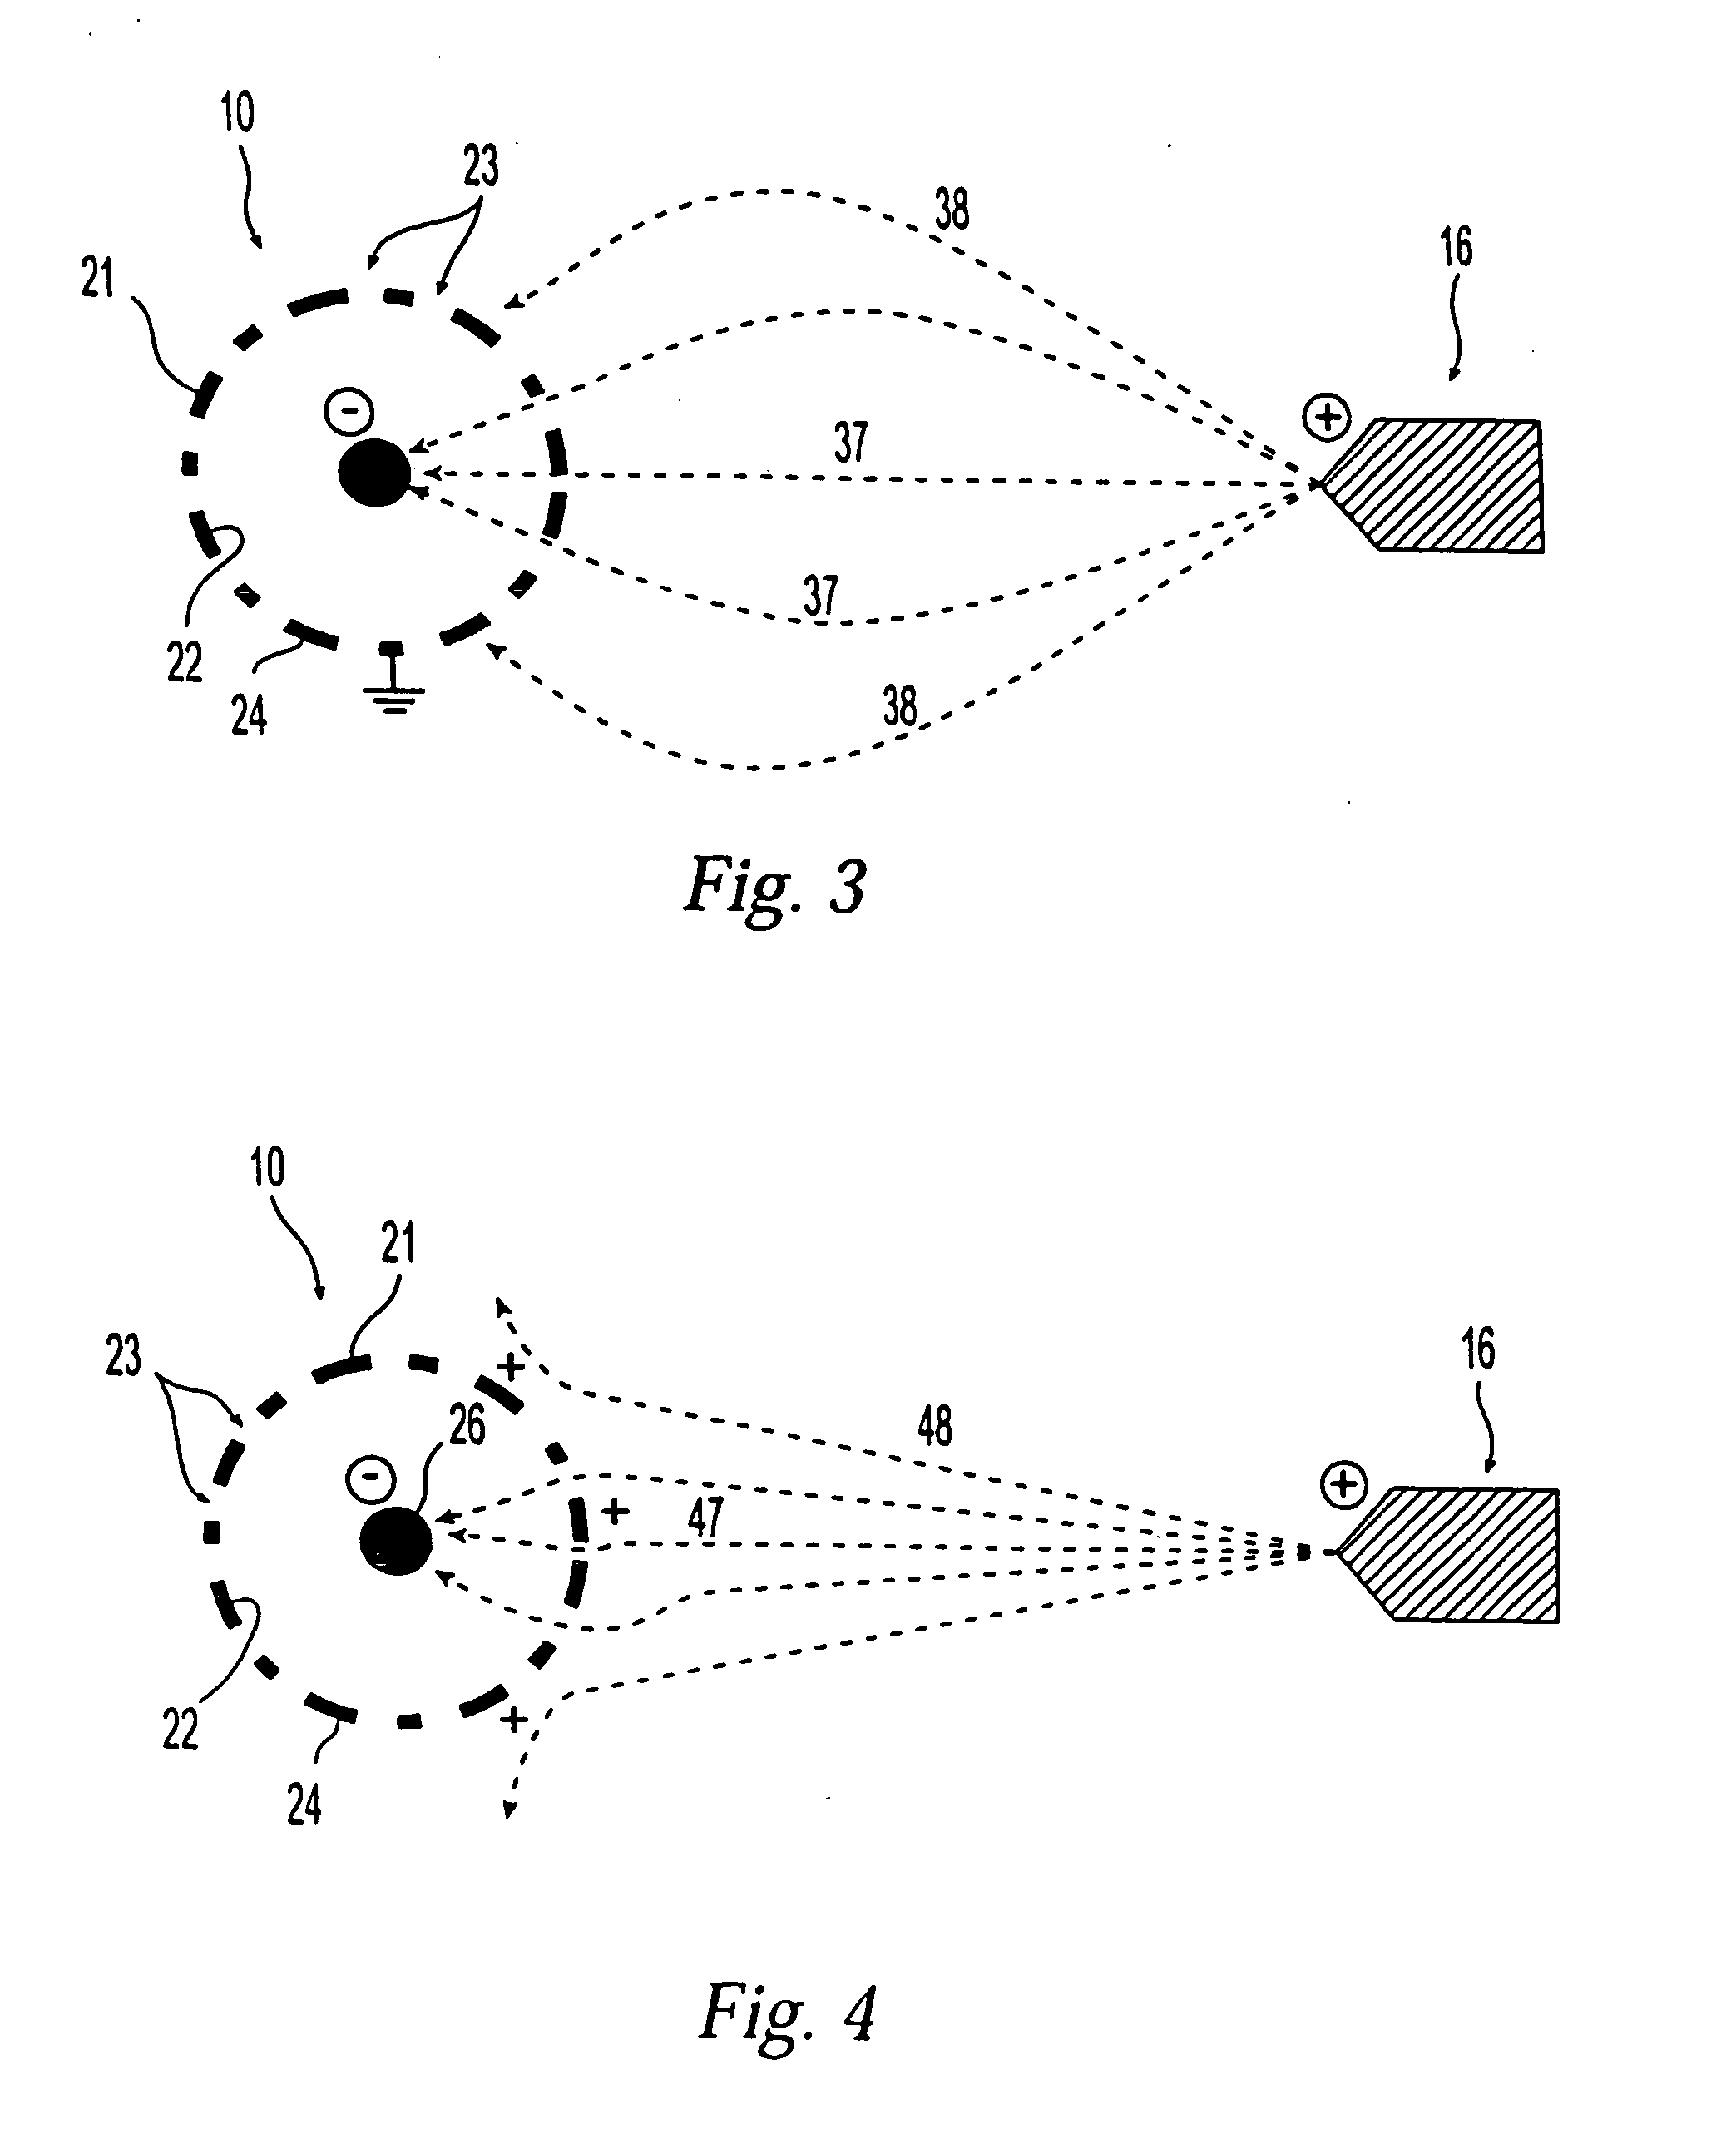 Method for spray-coating a medical device having tubular wall such as a stent